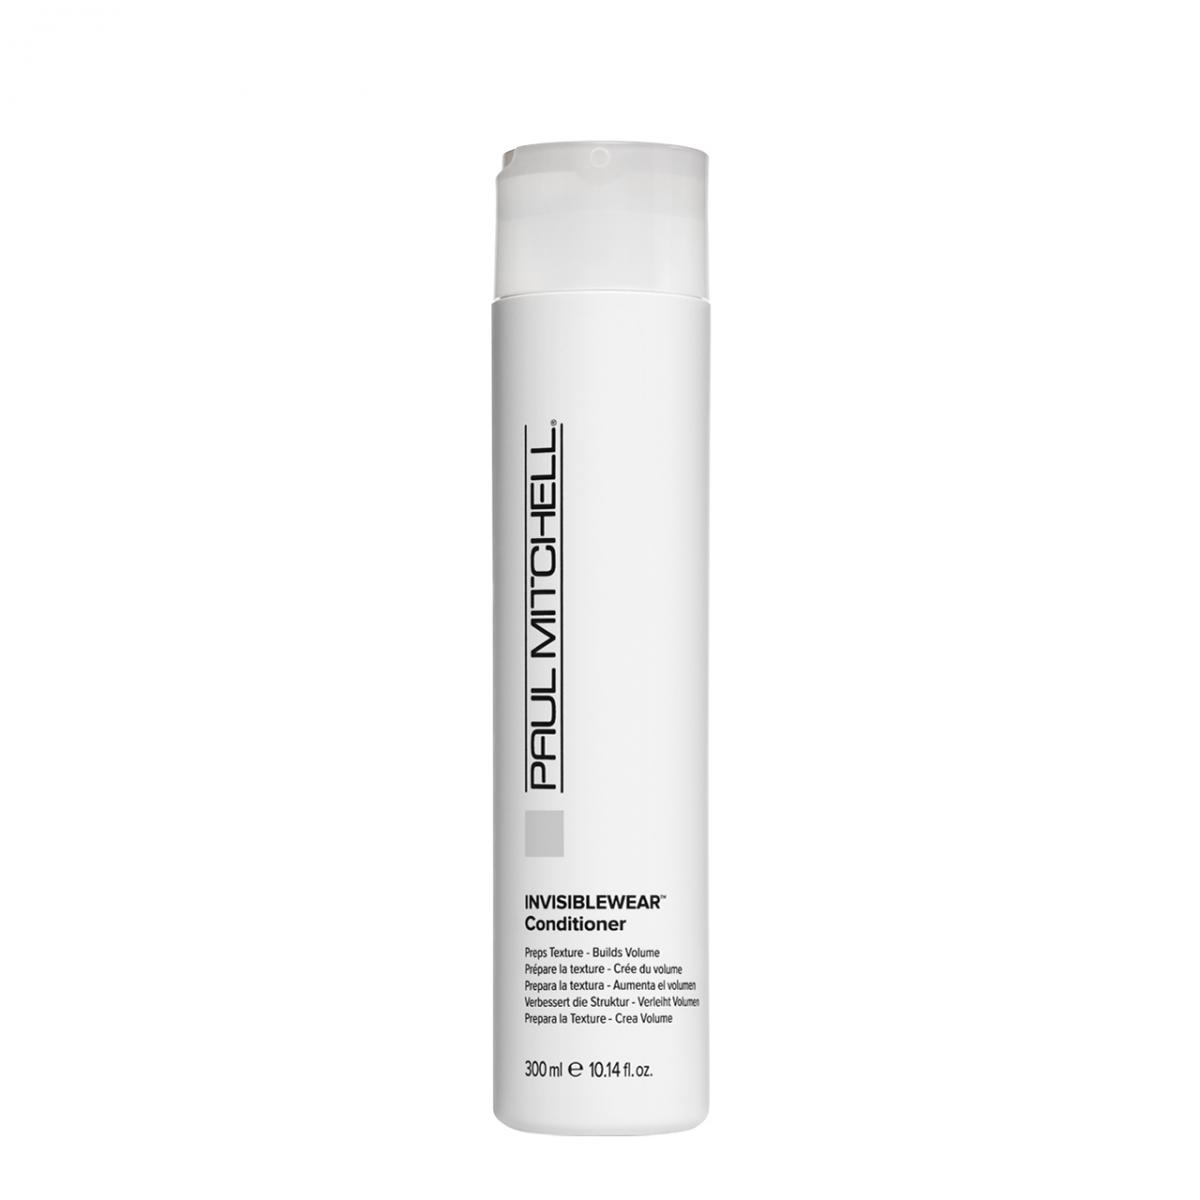 Paul Mitchell Invisiblewear Conditioner 300ml - Hairsale.se